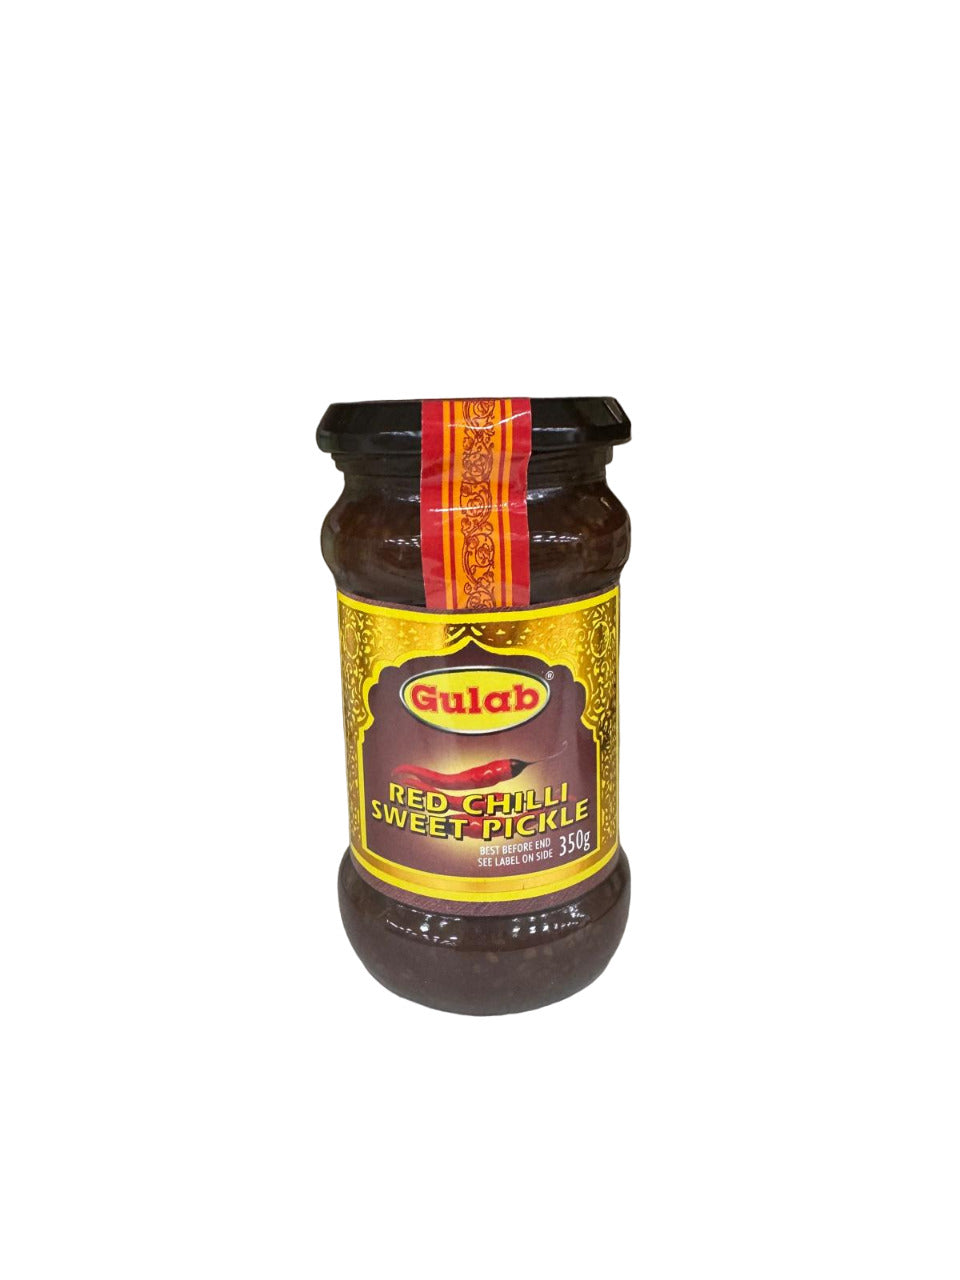 Gulab Red Chilli Sweet Pickle 300g